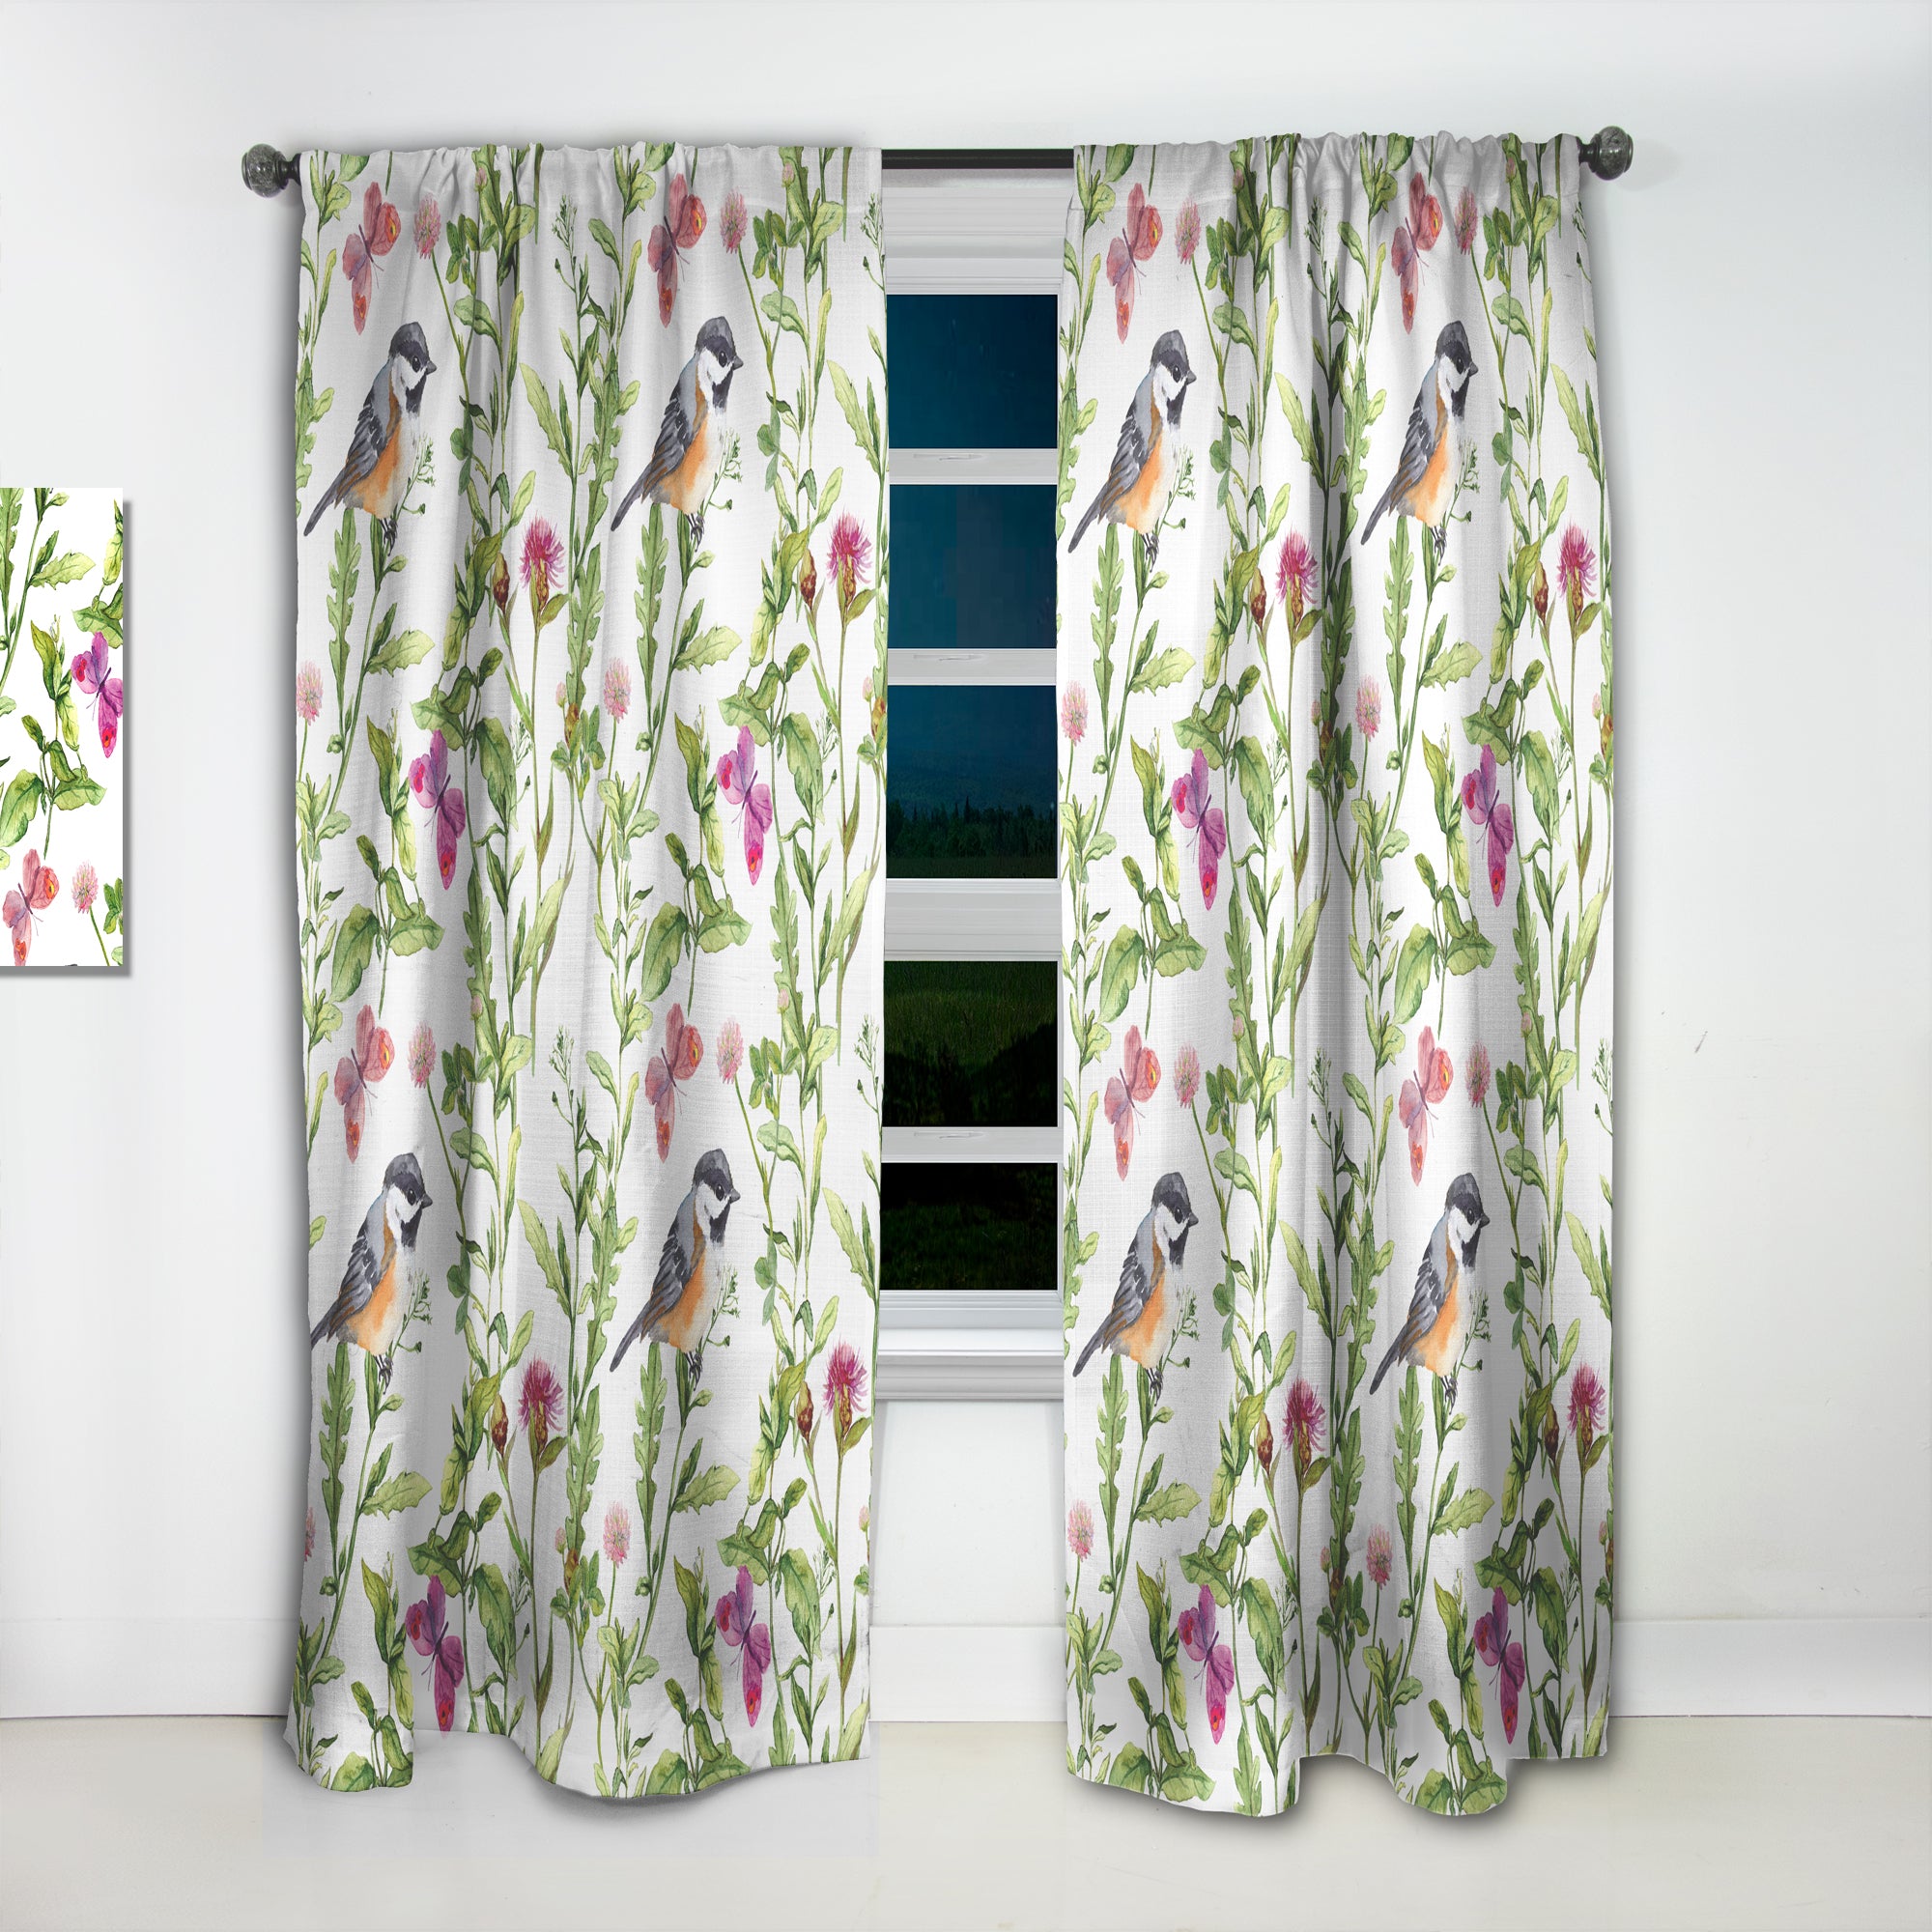 Designart 'Meadow with Butterflies, Birds and Herbs' Floral Curtain Panel